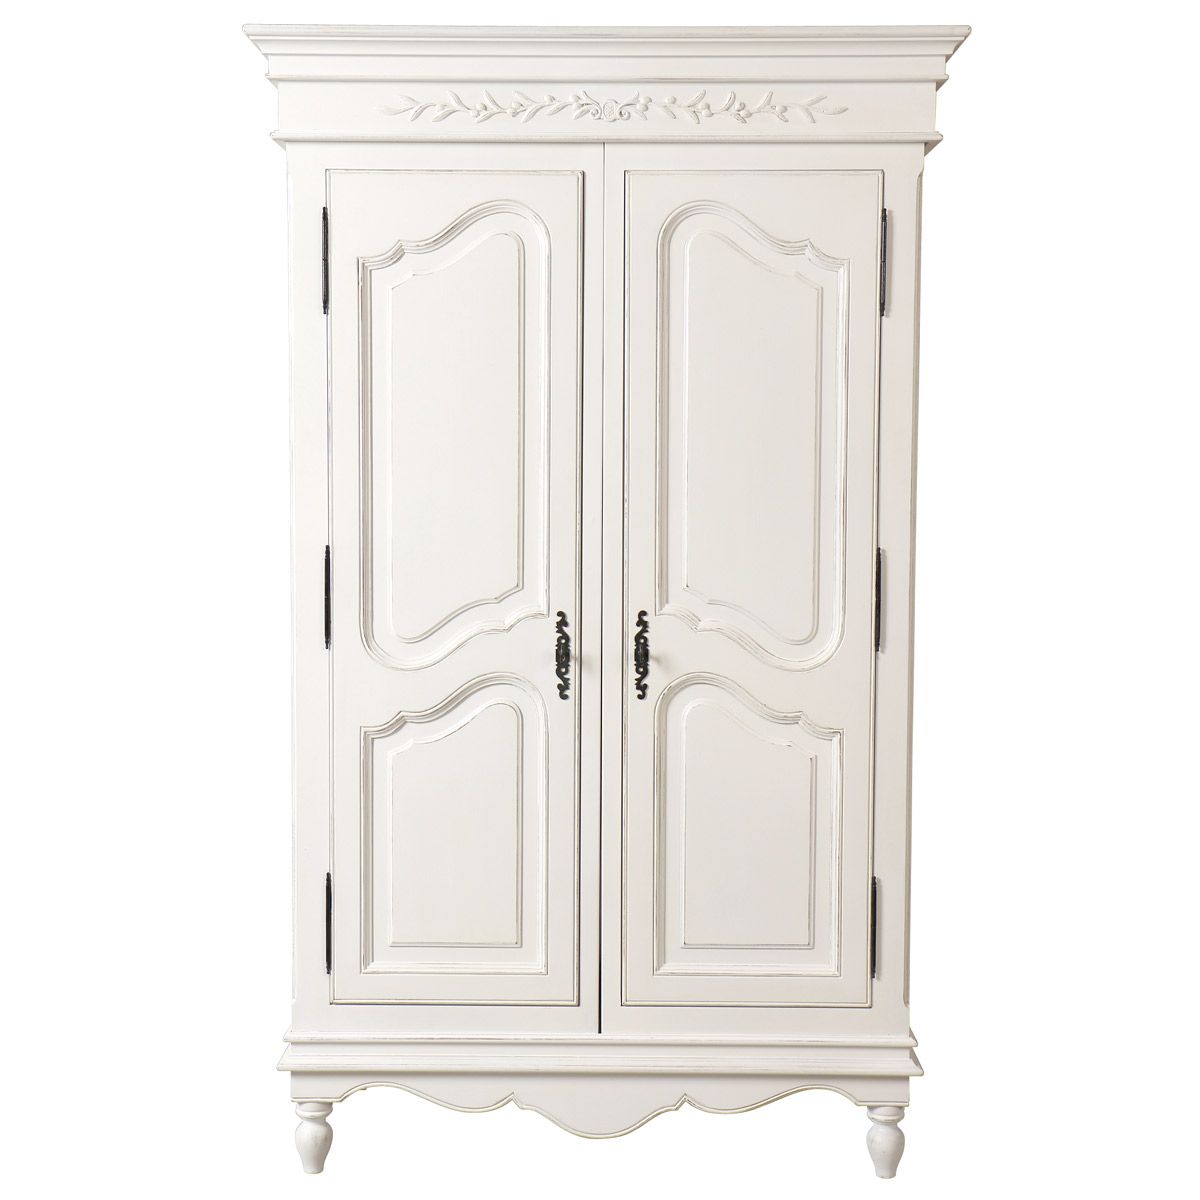 French Armoire Wardrobe – Romance – Low Cost Delivery, Nationwide With French Armoire Wardrobes (Gallery 3 of 20)